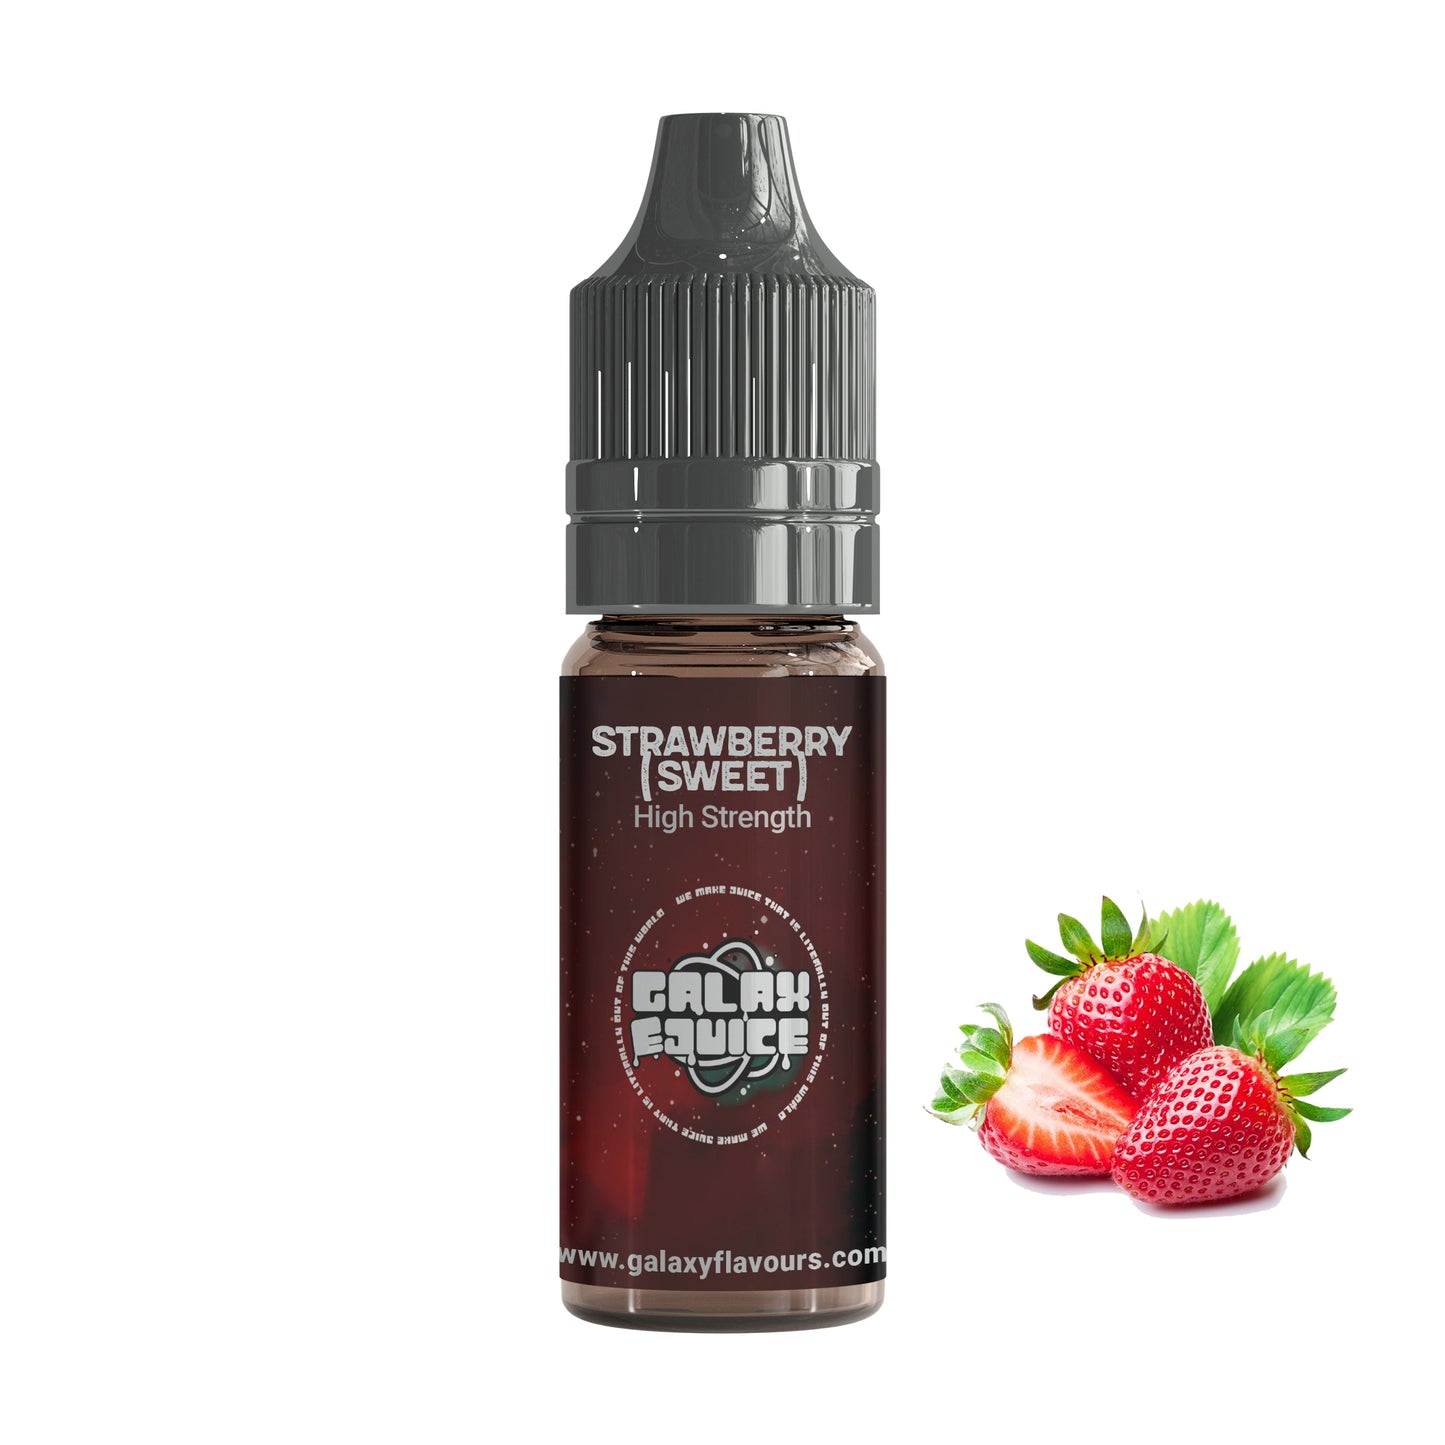 Sweet Strawberry High Strength Professonal Flavouring.